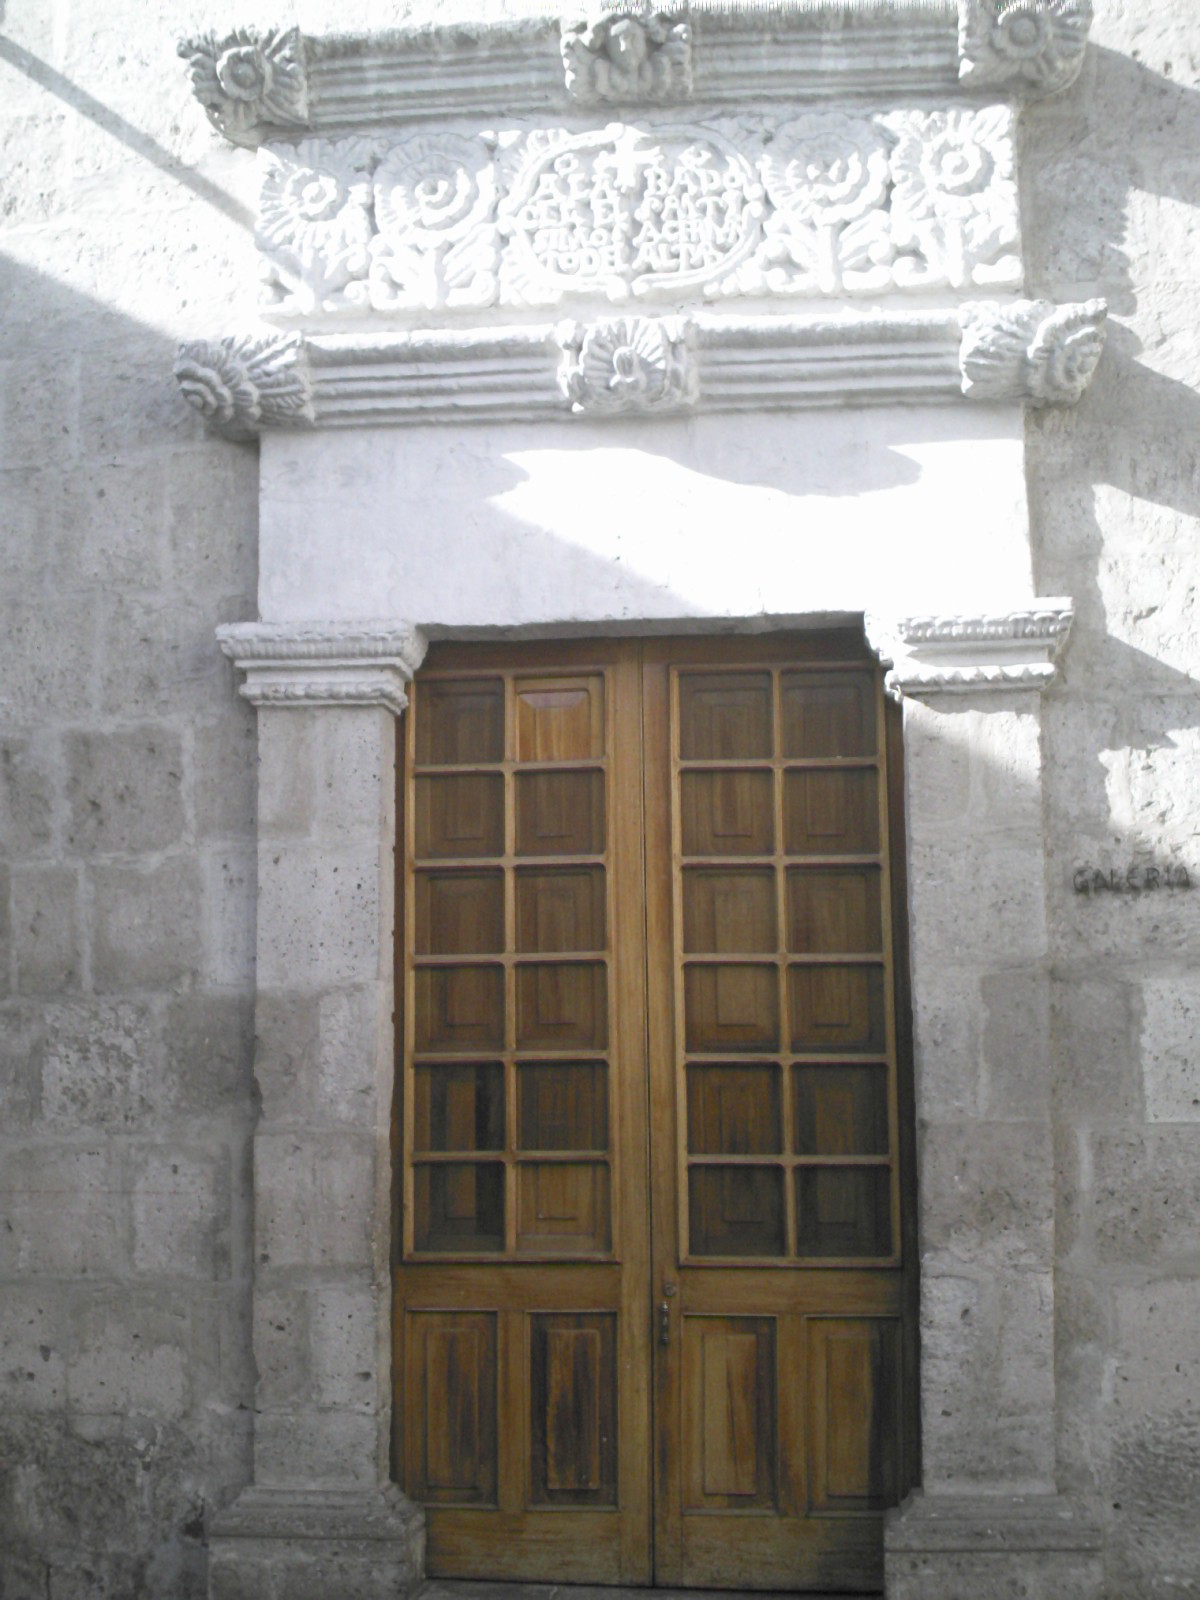 a pair of doors that have been placed in front of an old stone building